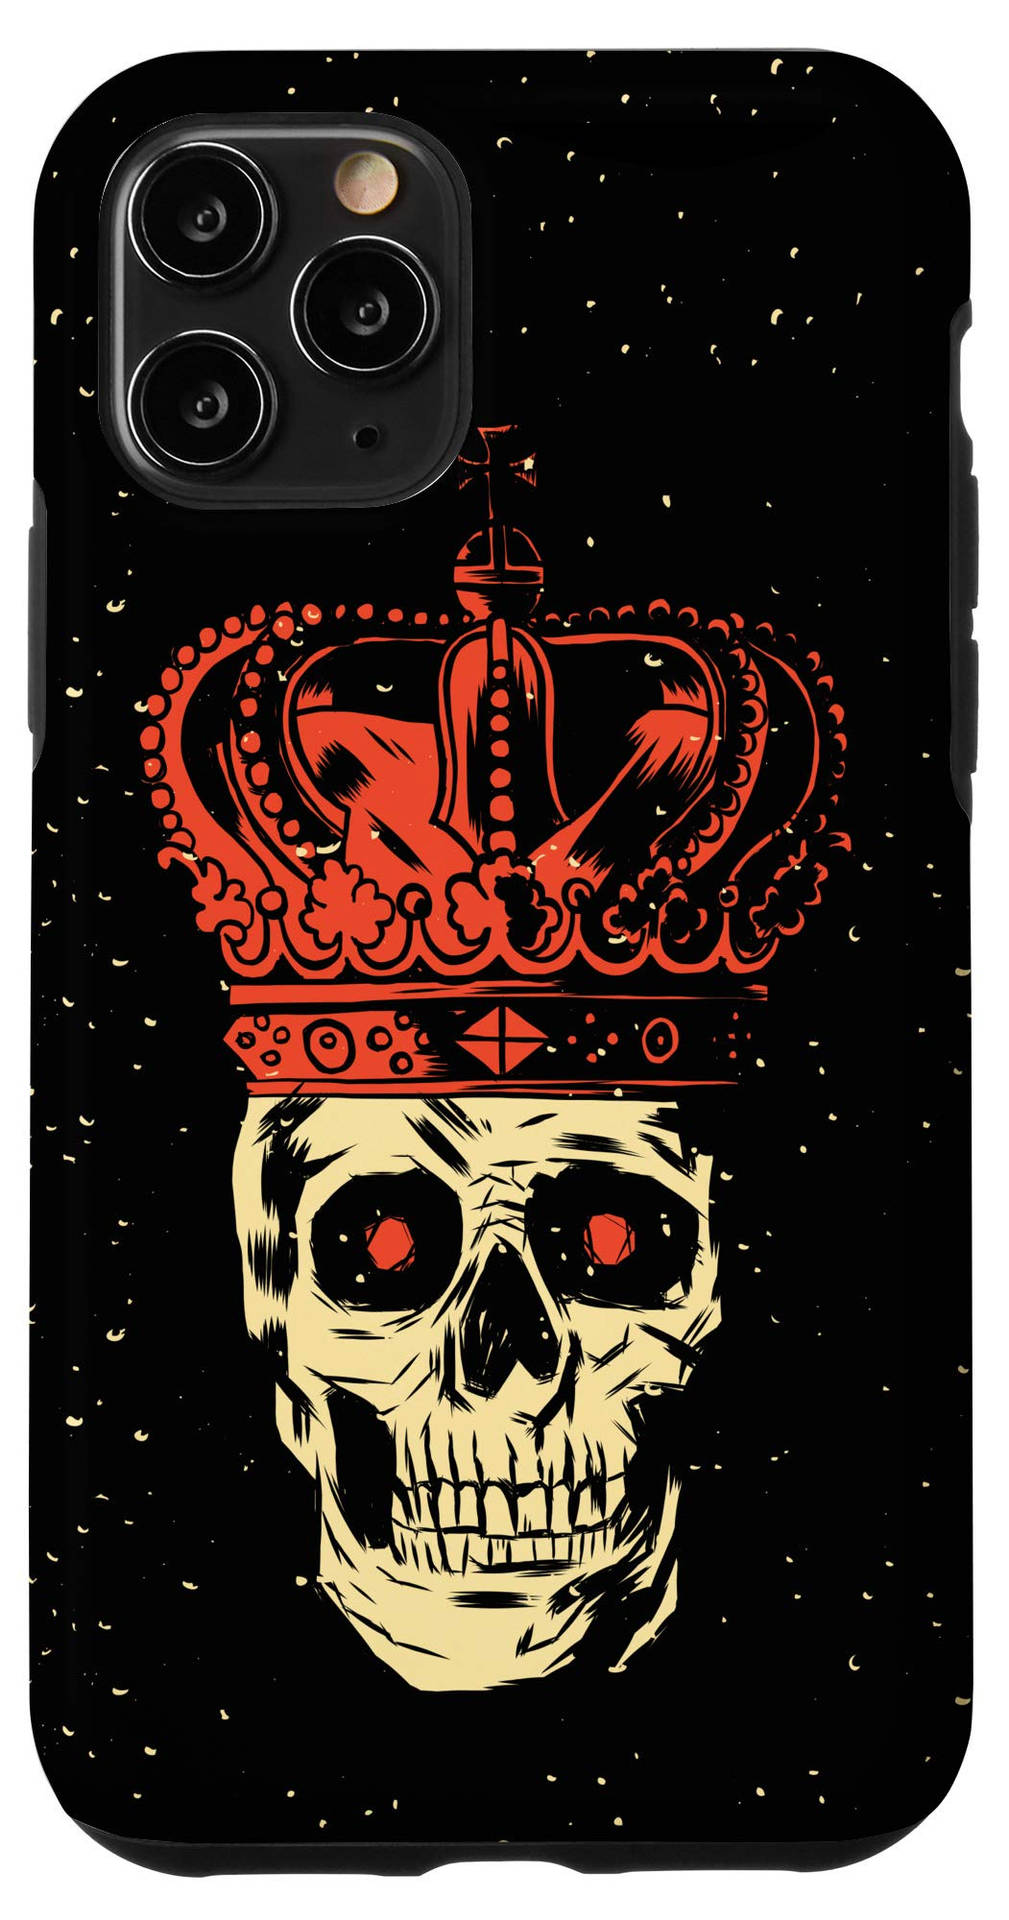 Embrace Your Dark Side with Gothic Phone Wallpaper